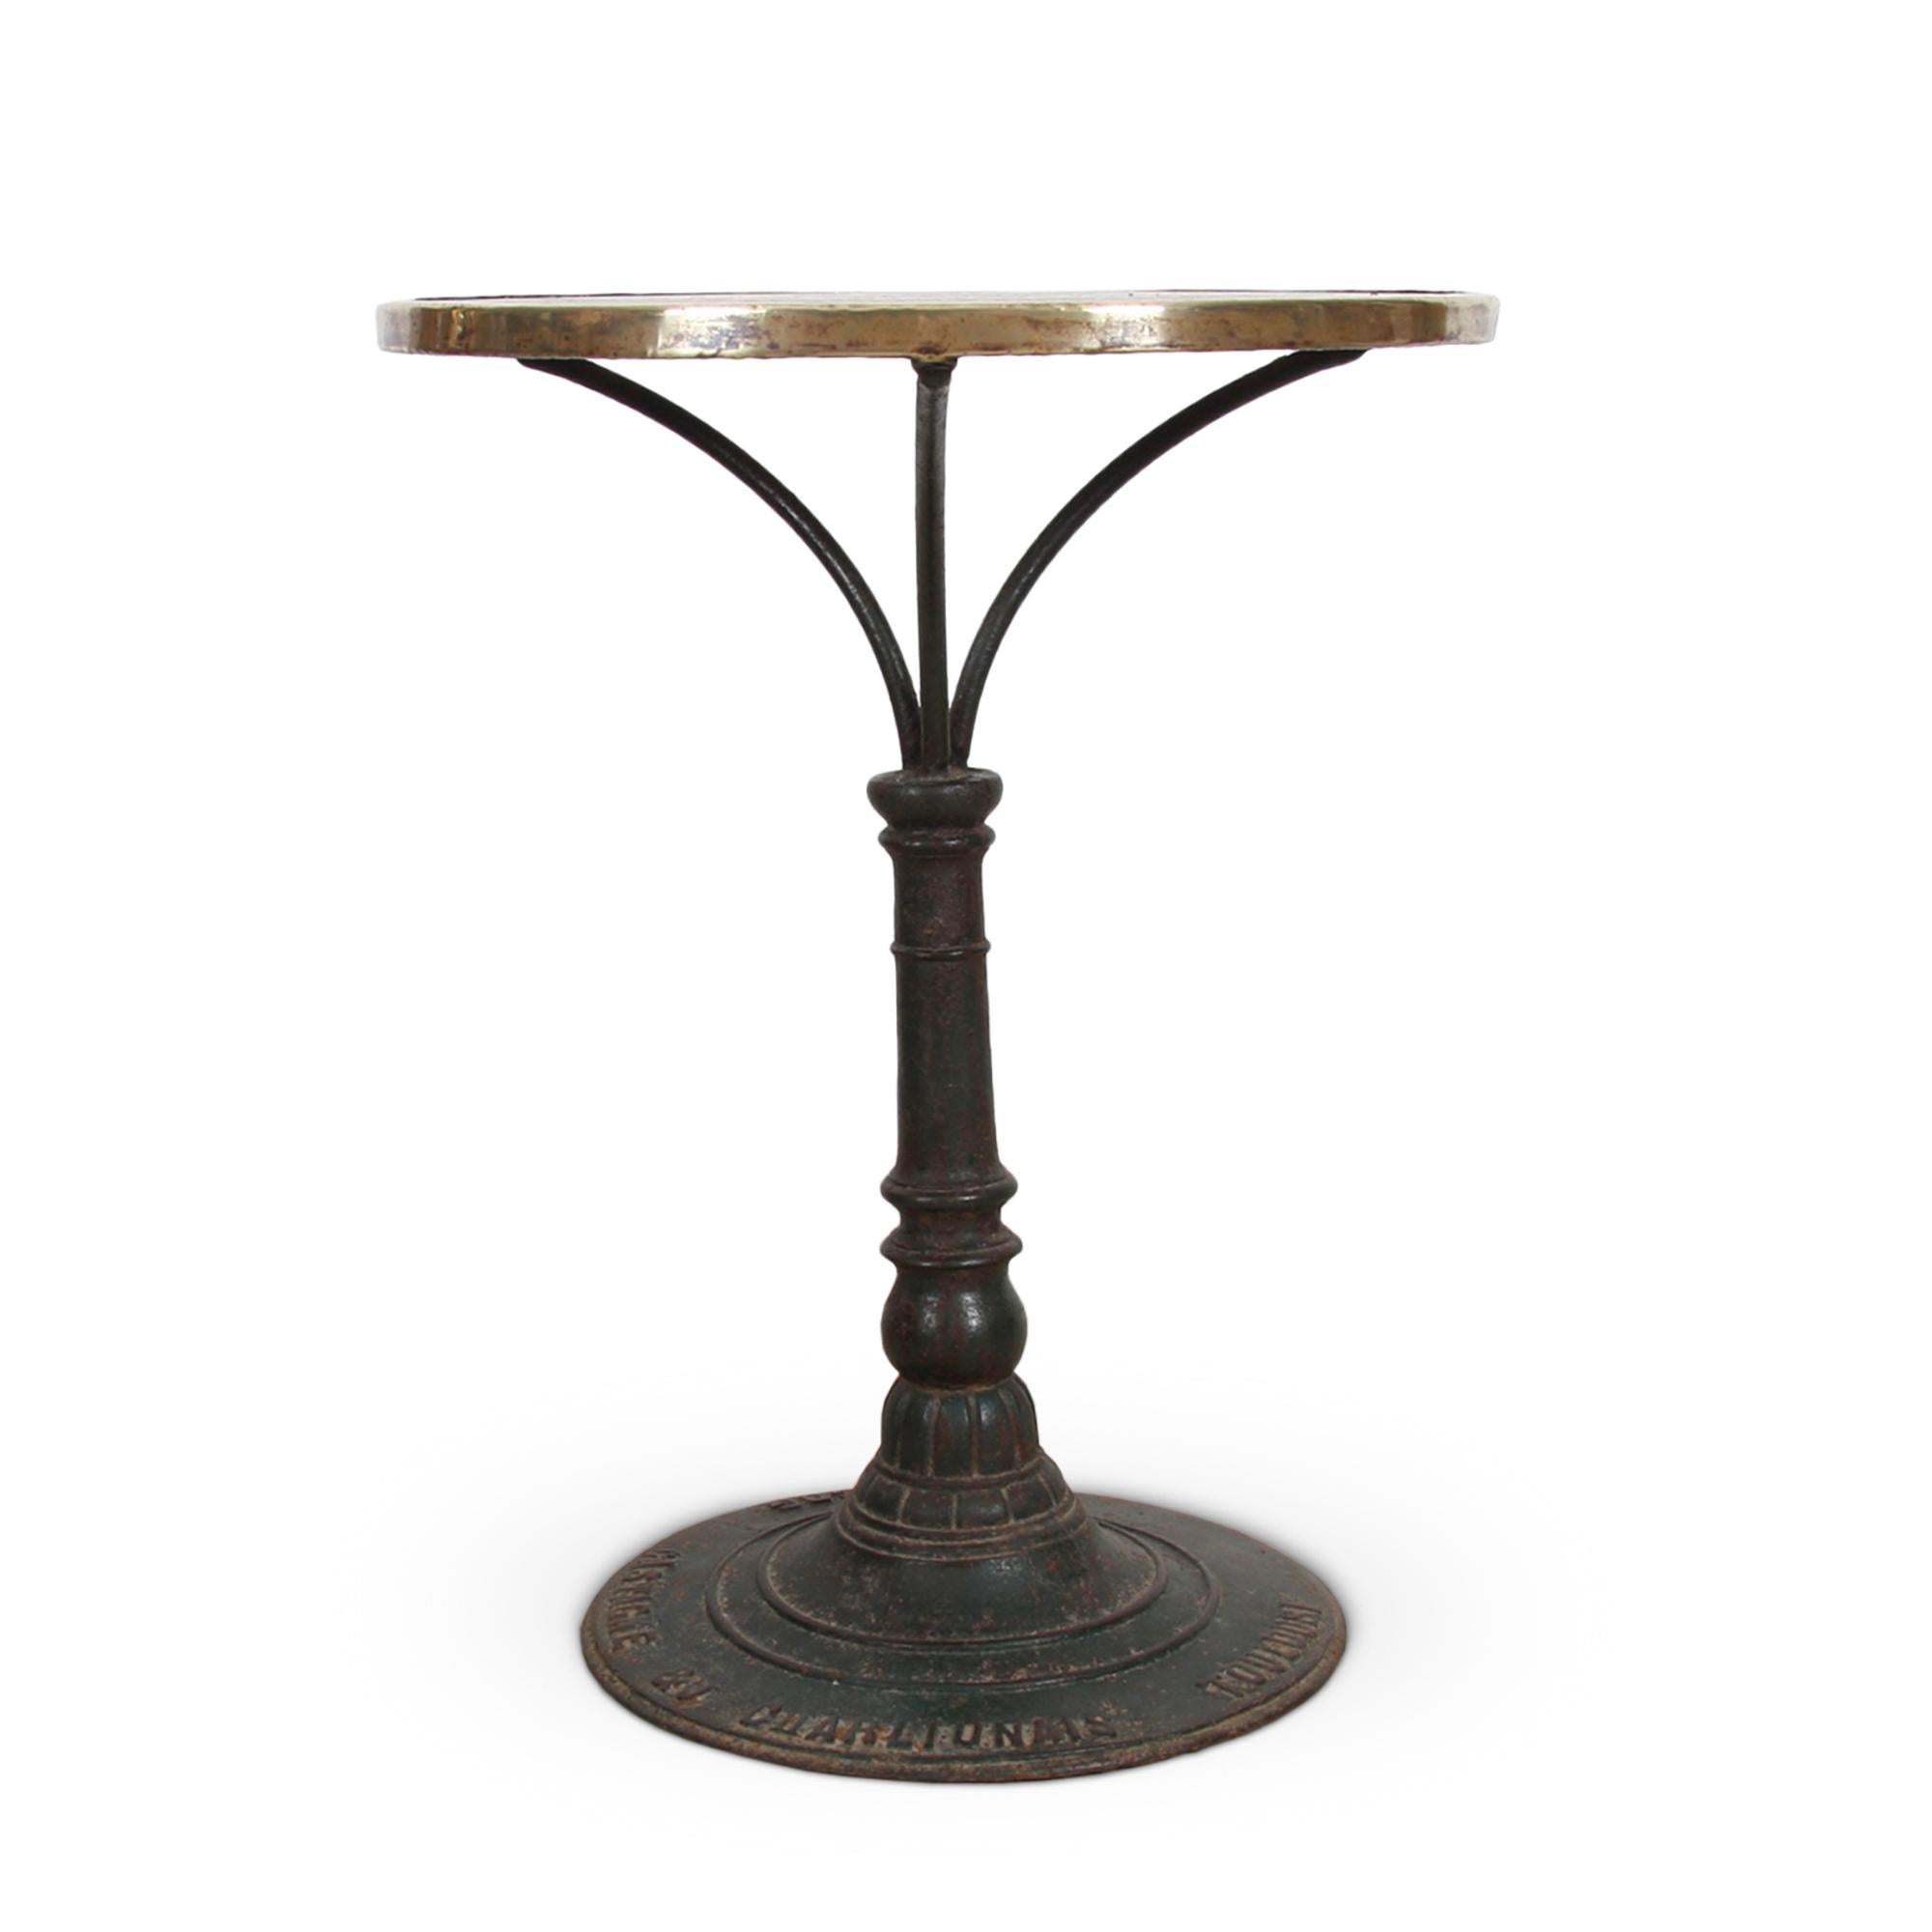 This magnificent mosaic top table, with brass detail and a wrought iron base, dates back to 1920s France. Pedestal is stamped by the Toulouse maker Castagne & J. Charlionais.